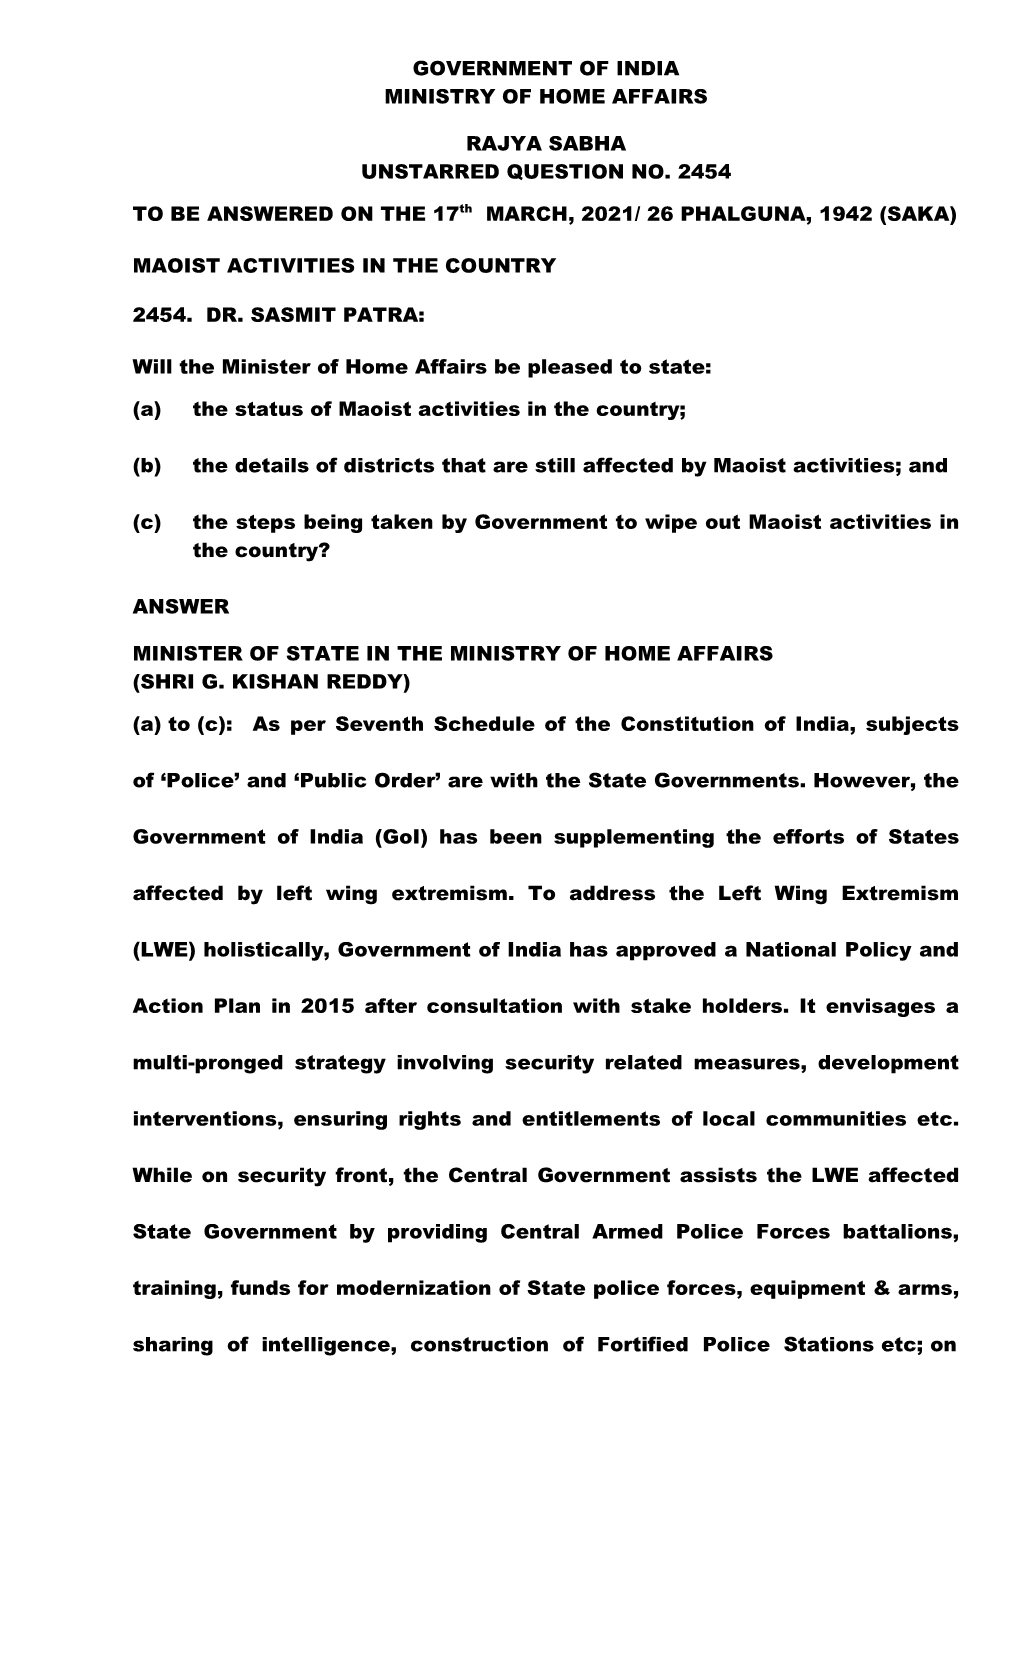 Government of India Ministry of Home Affairs